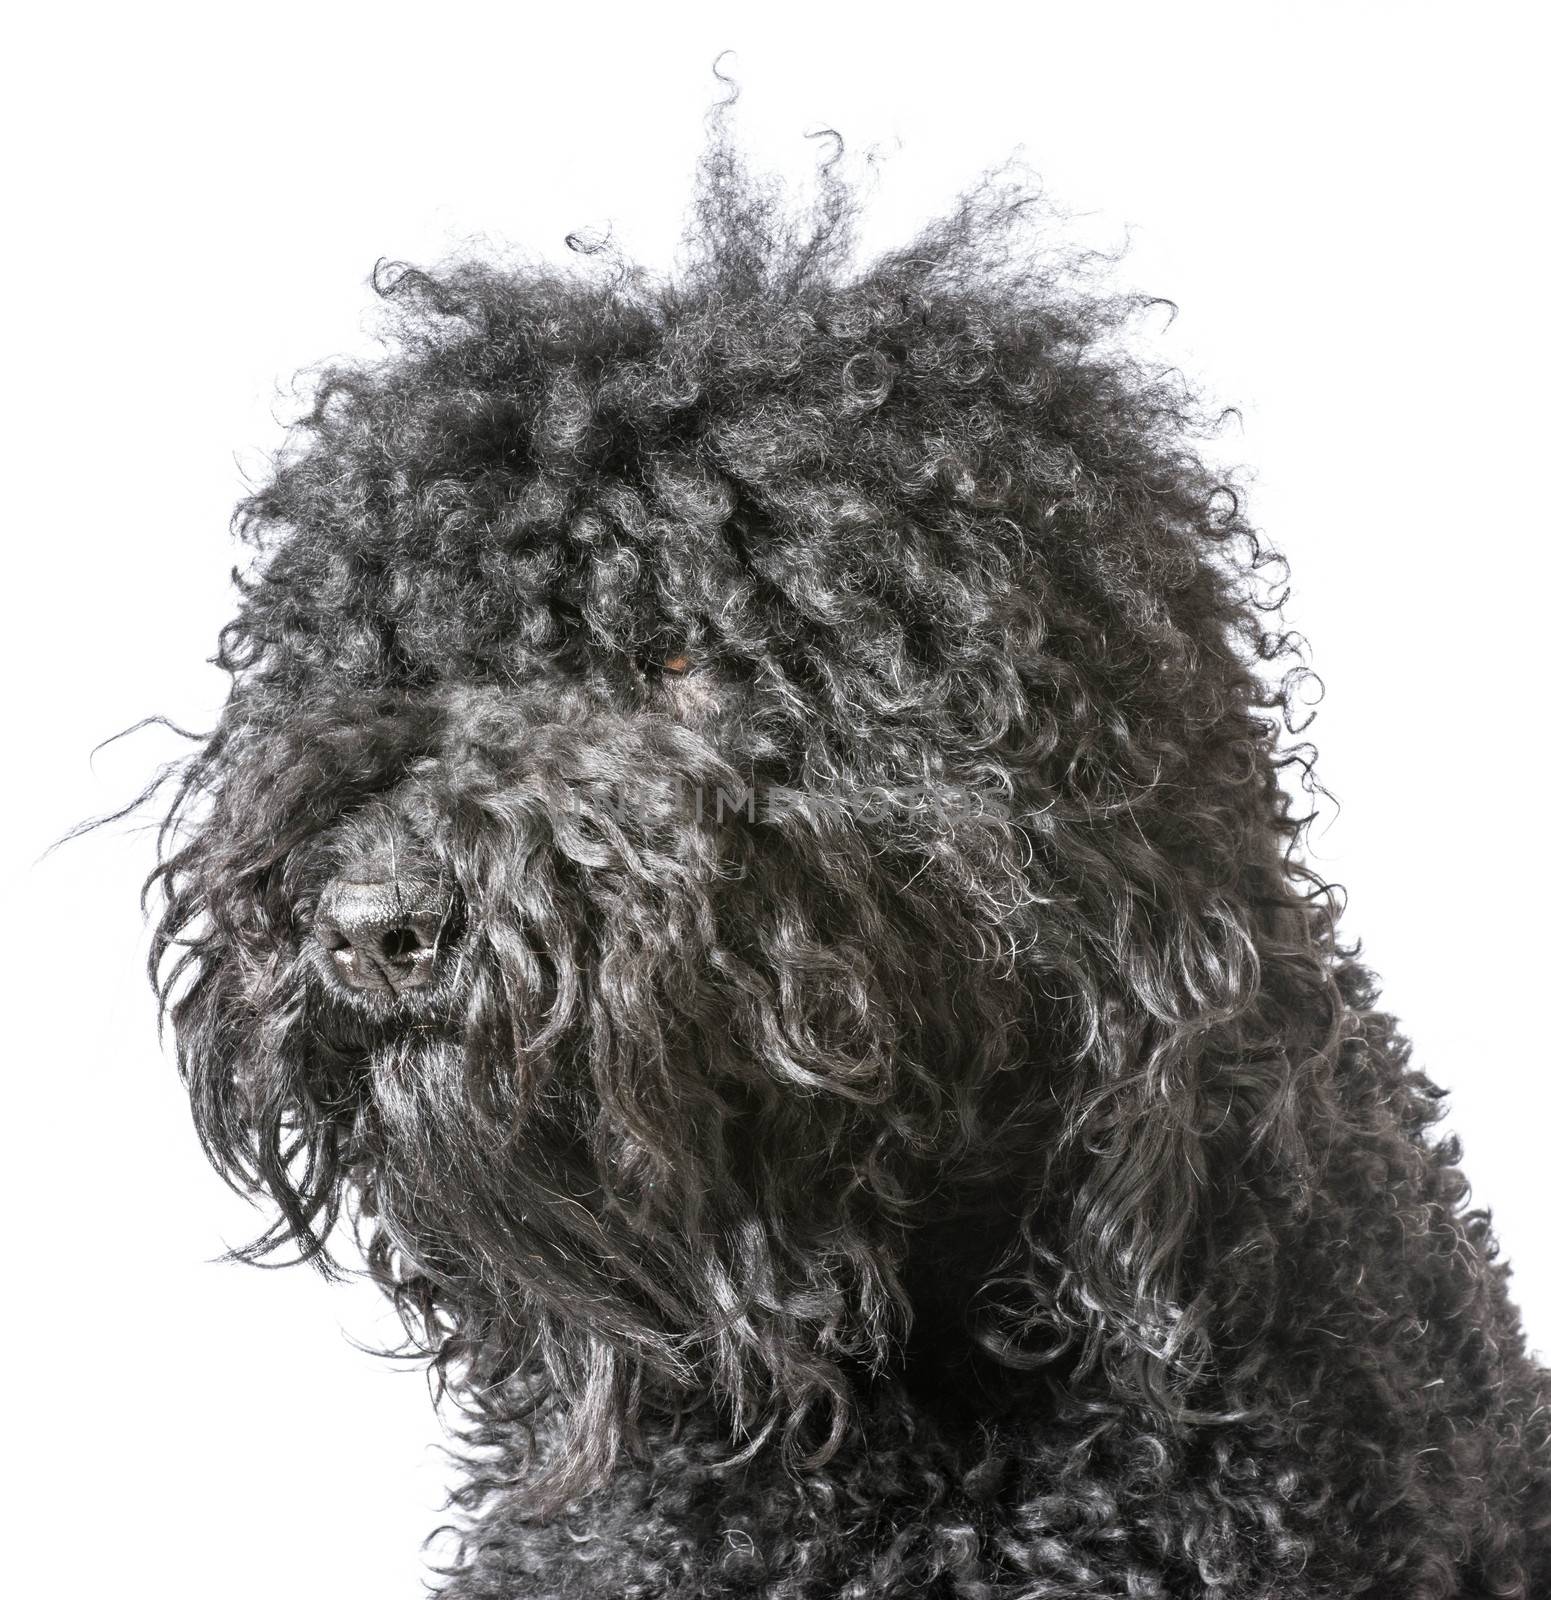 portrait of a barbet dog on white background